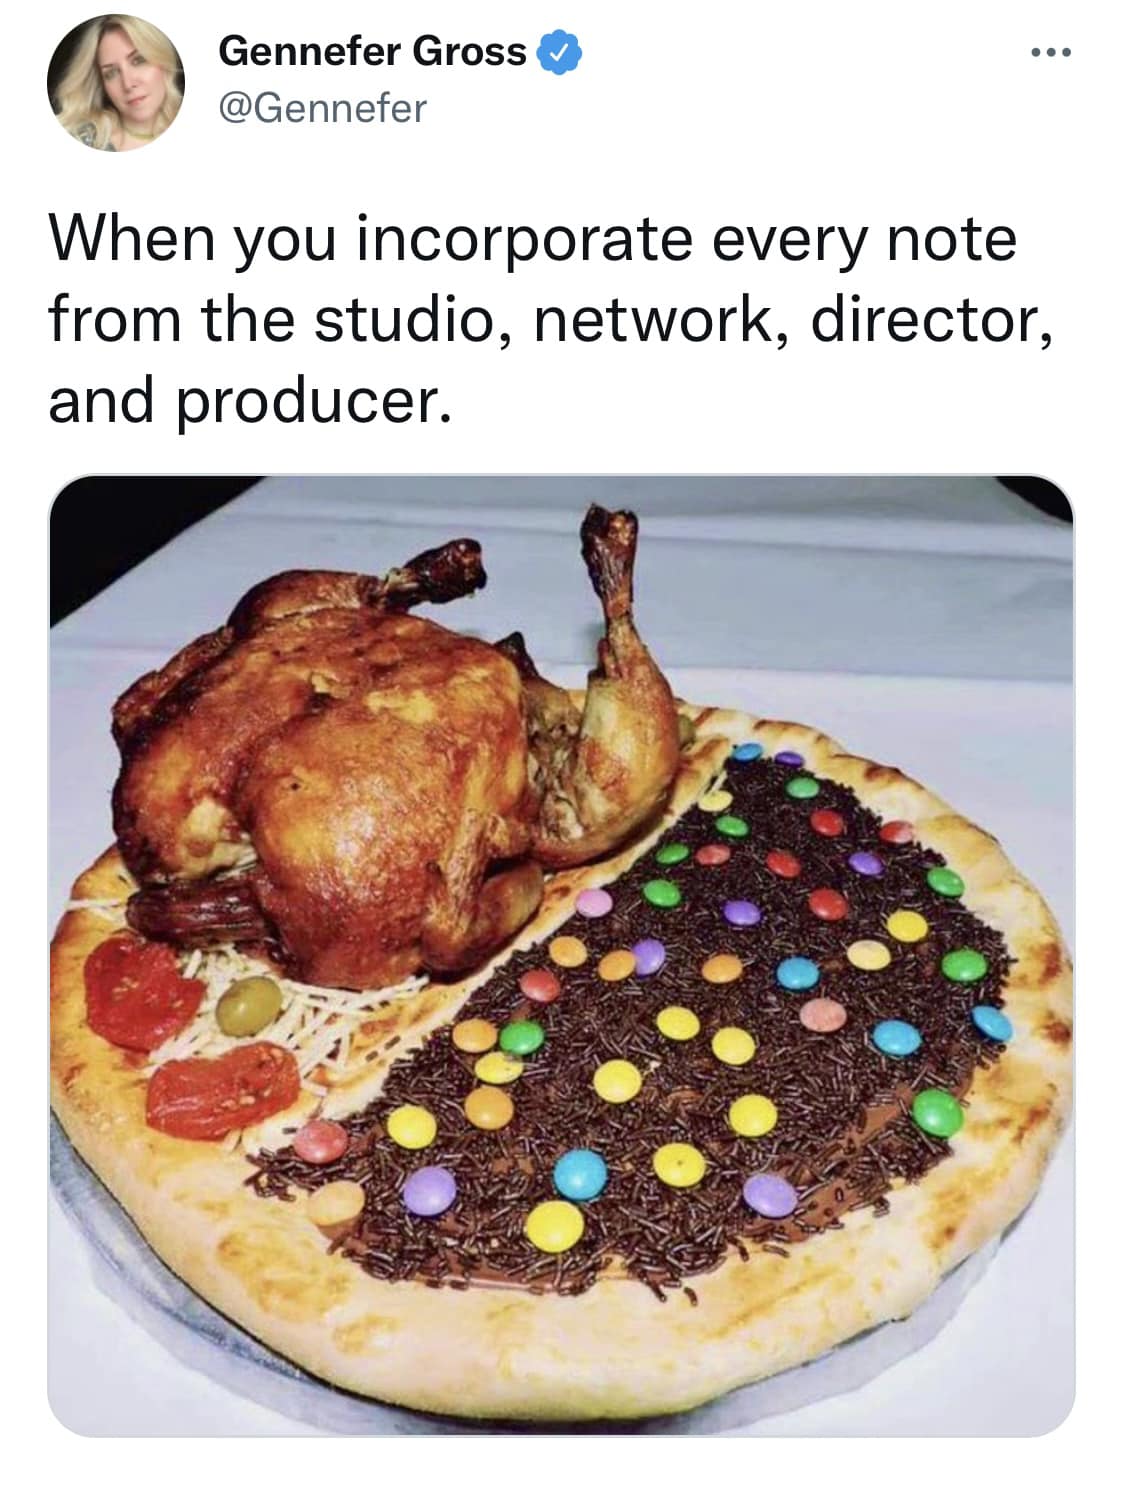 A funny dish made of a pizza mixed with chicken, m&m’s chocolate chips